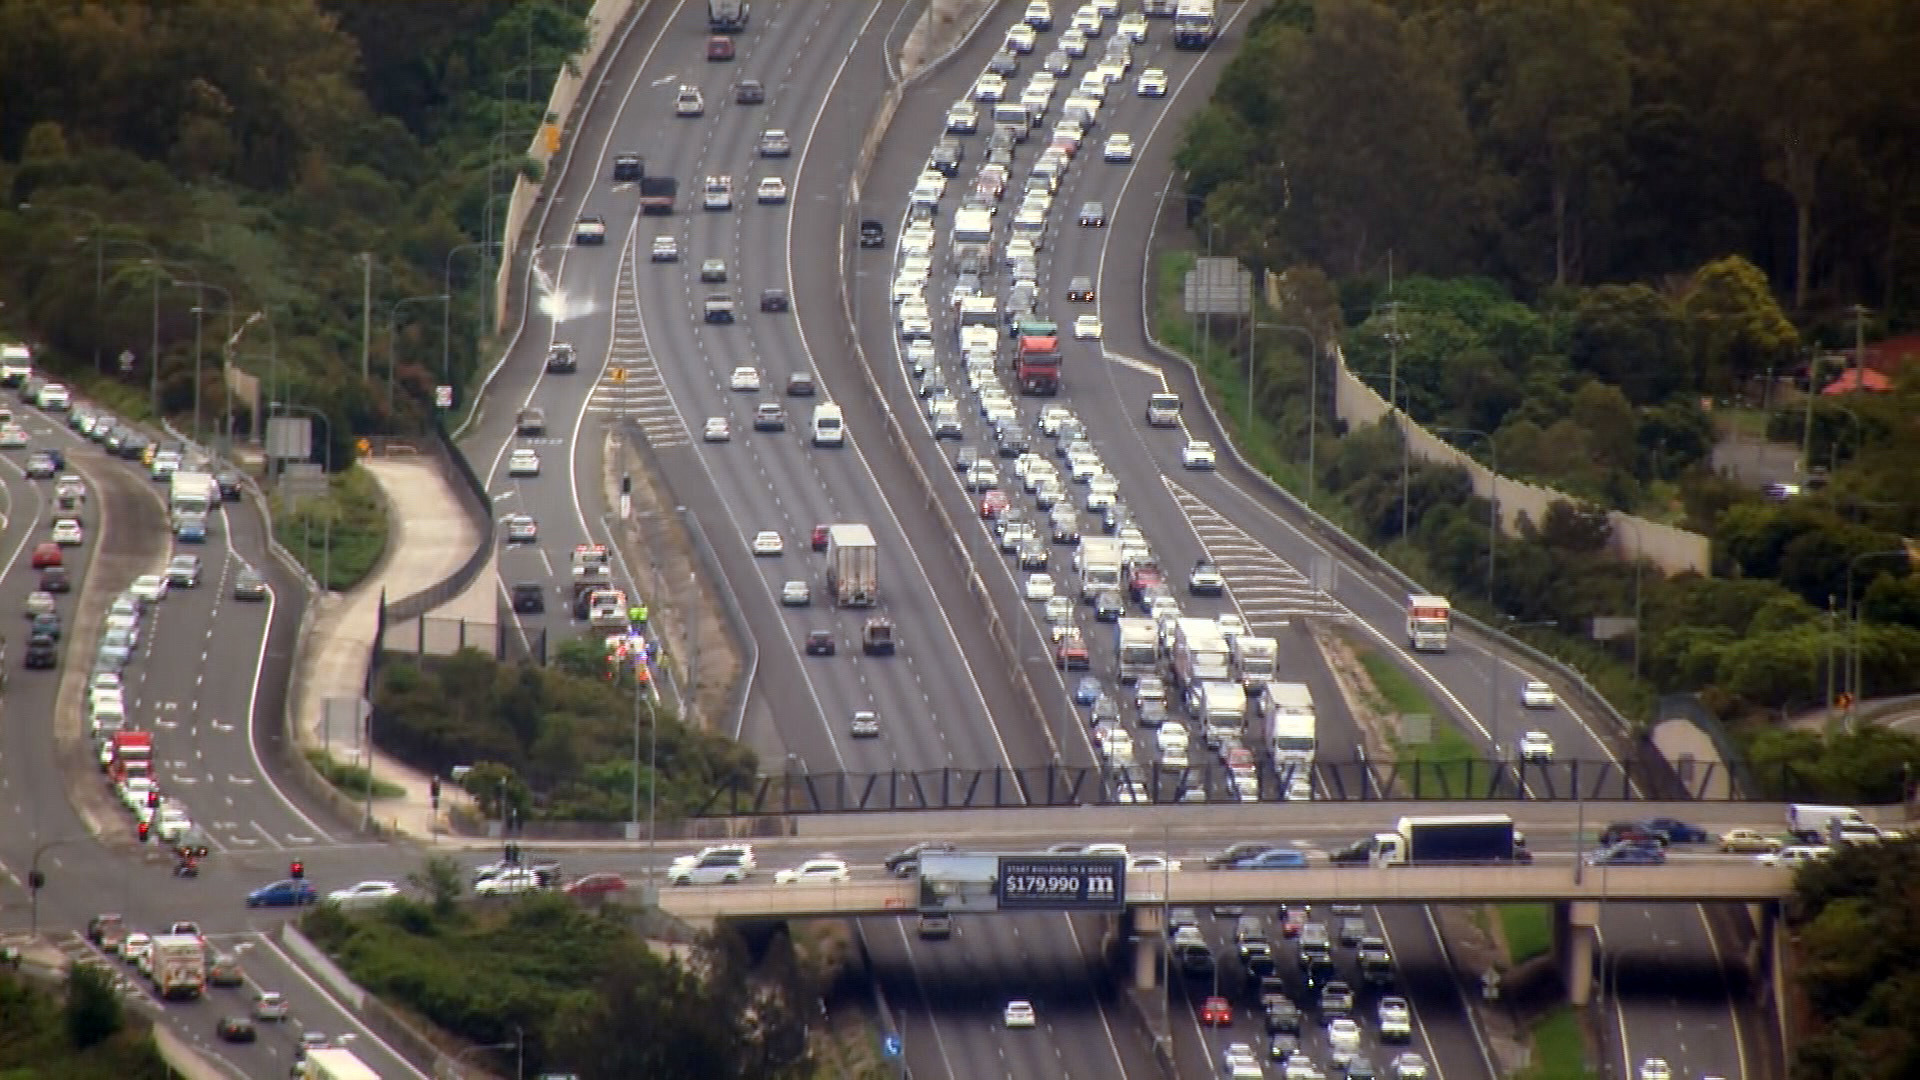 Public holiday traffic has hit Queensland